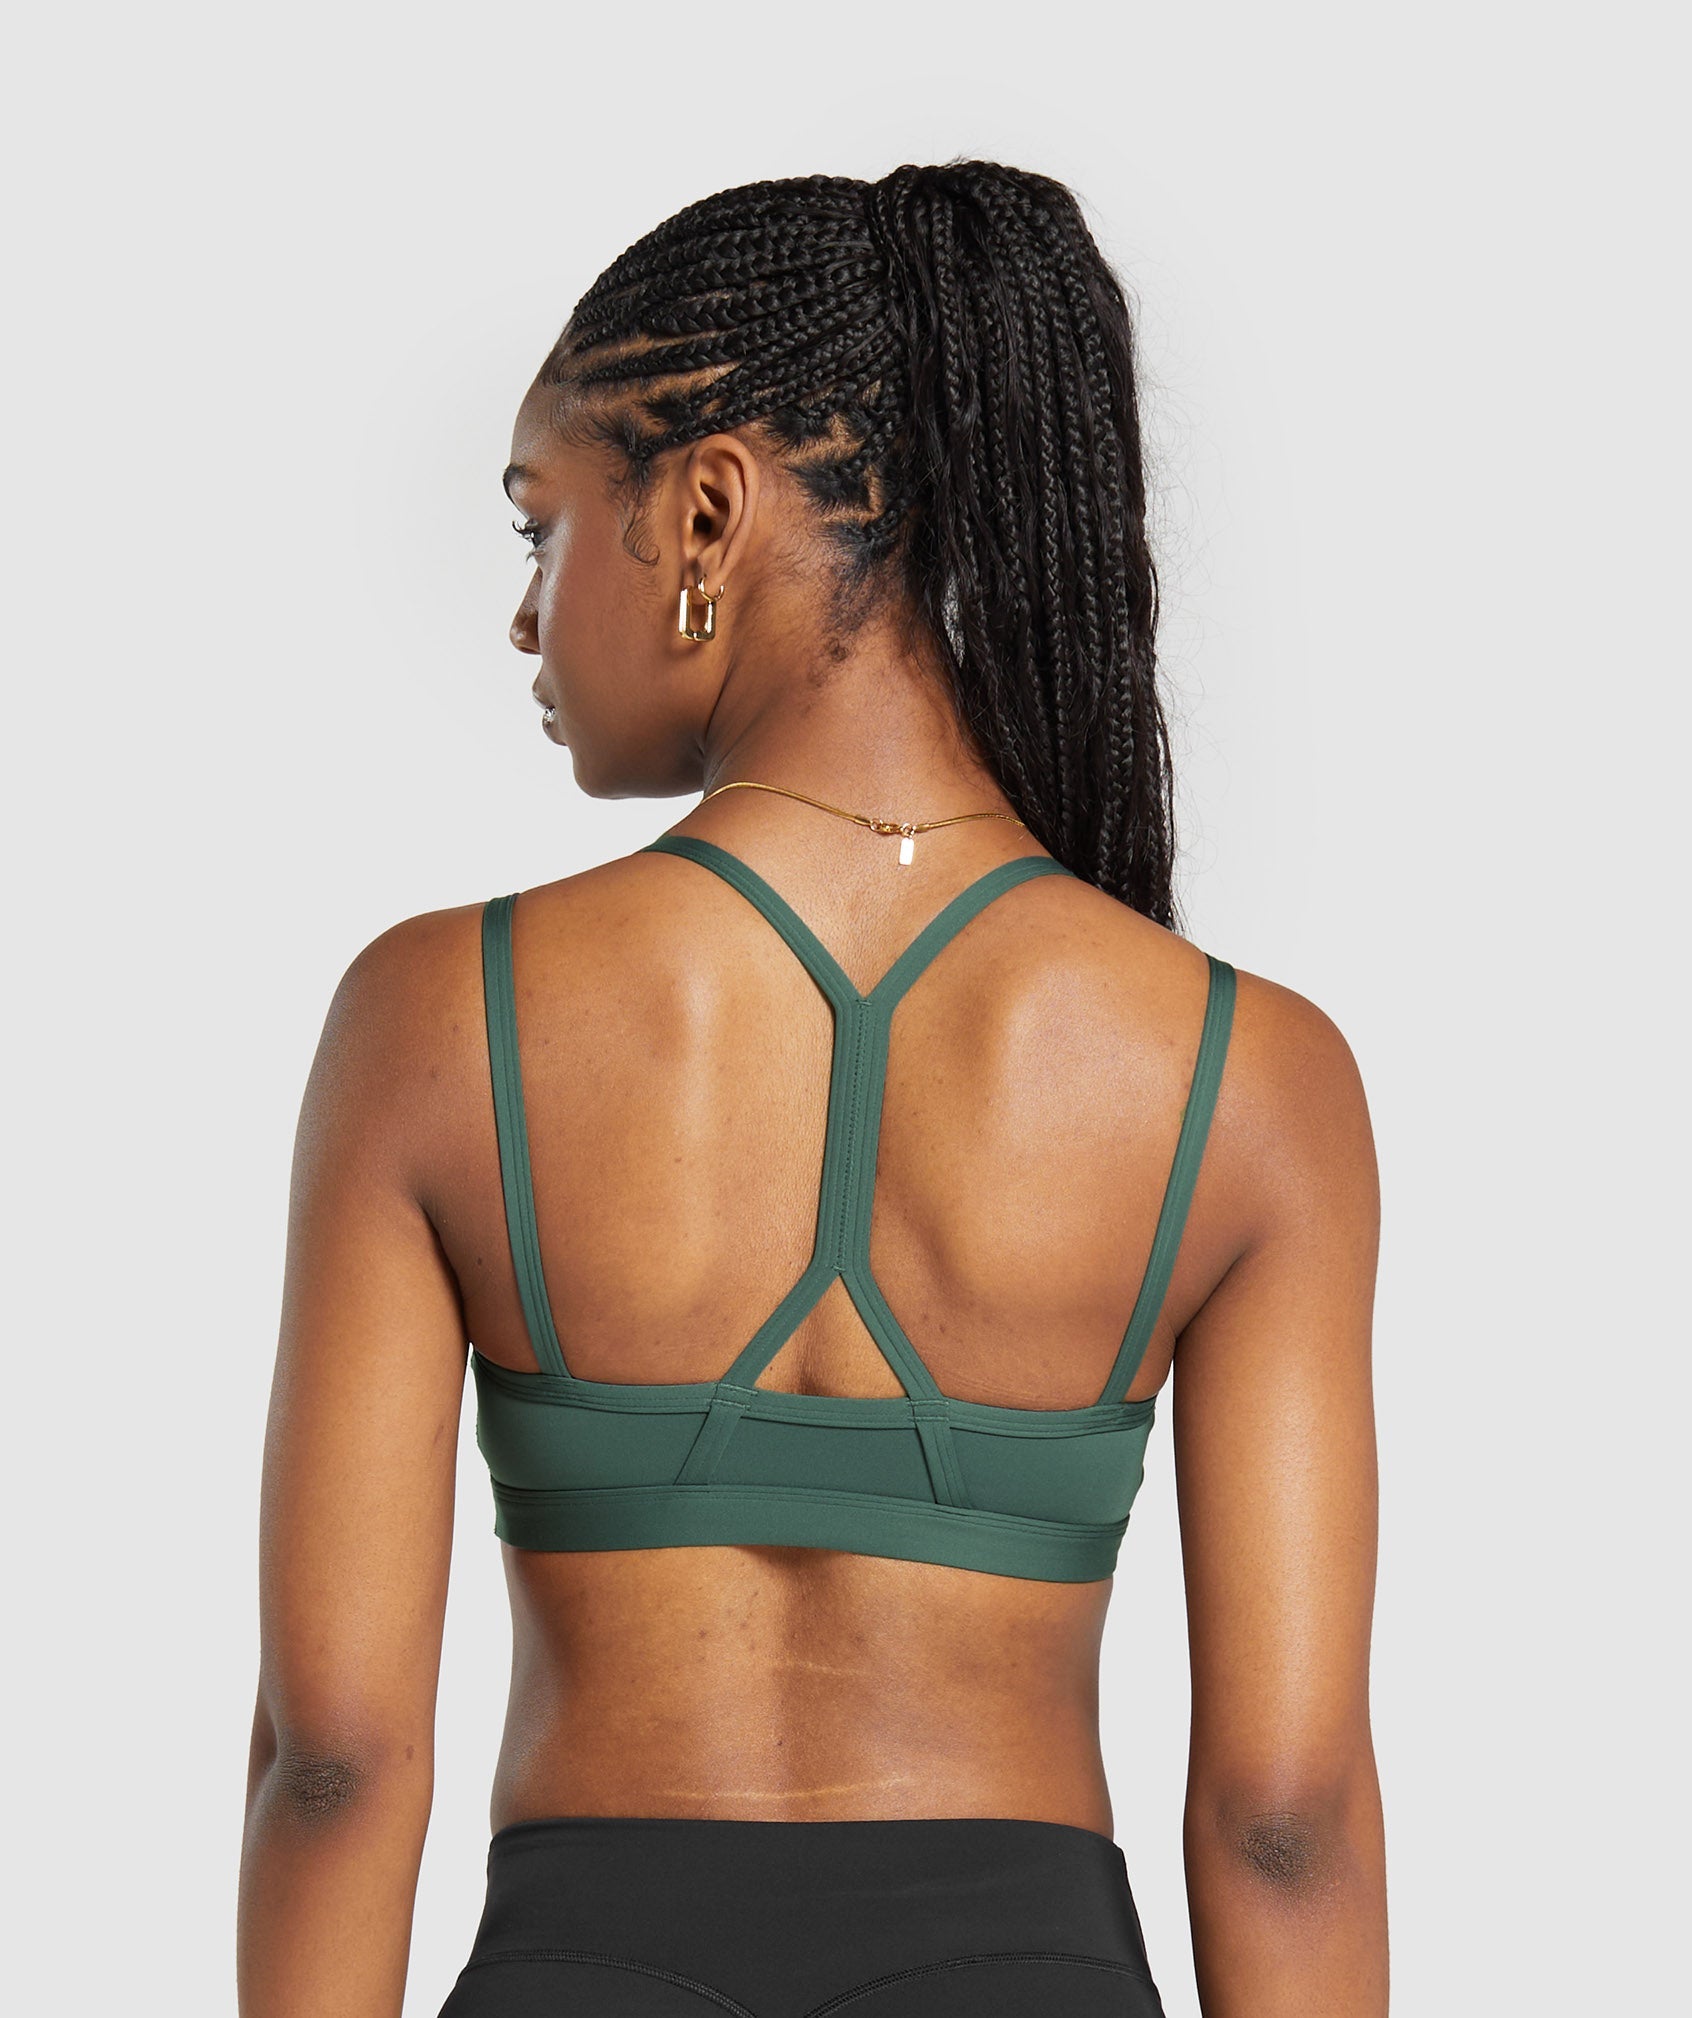 Strap Feature Sports Bra in Slate Teal - view 2